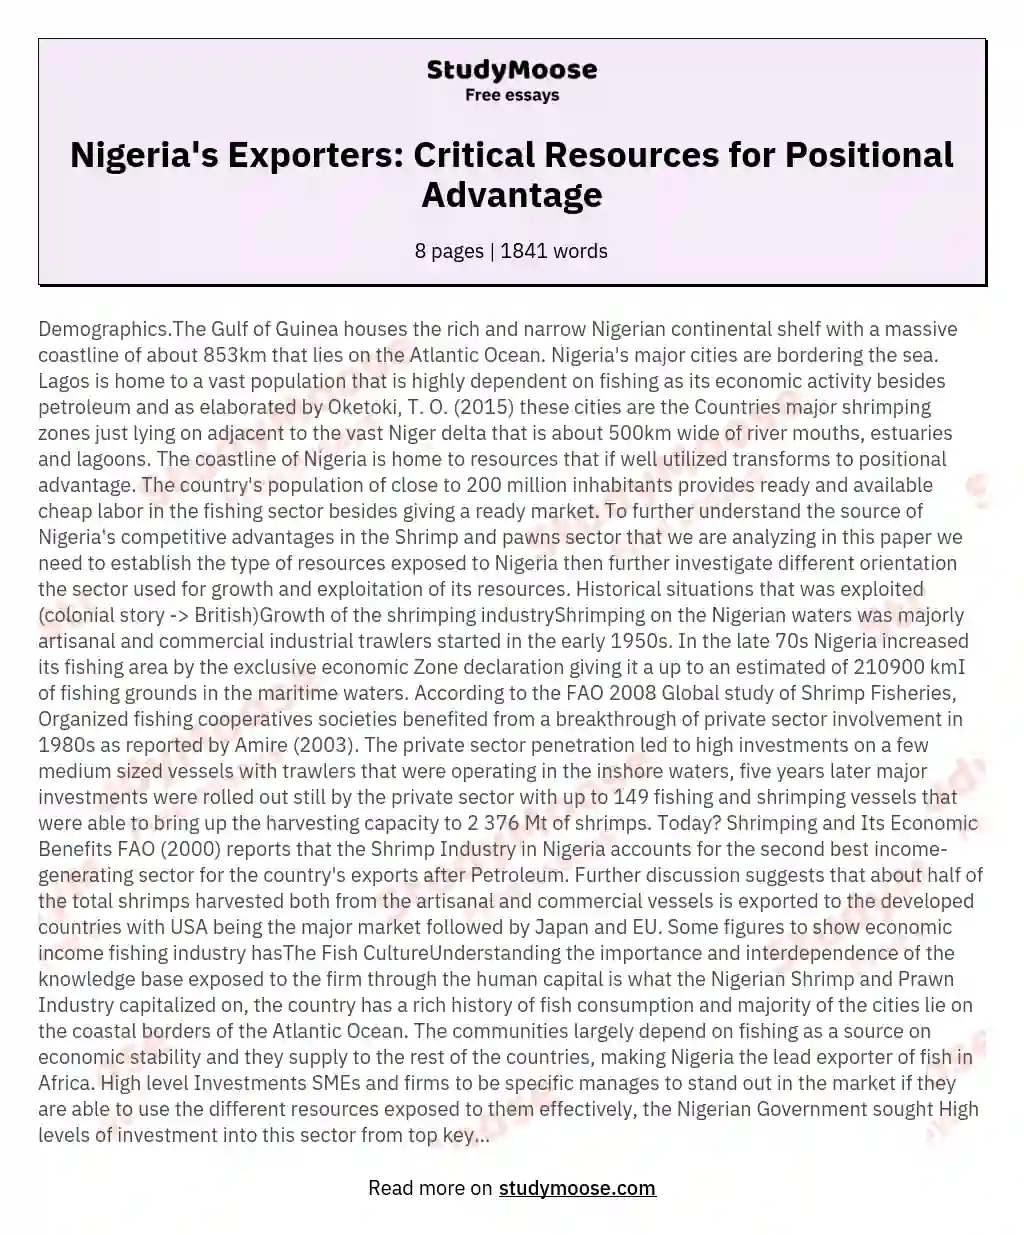 Case Study, Nigeria. What are critical resources that has given Nigerian exporters a positional advantage?